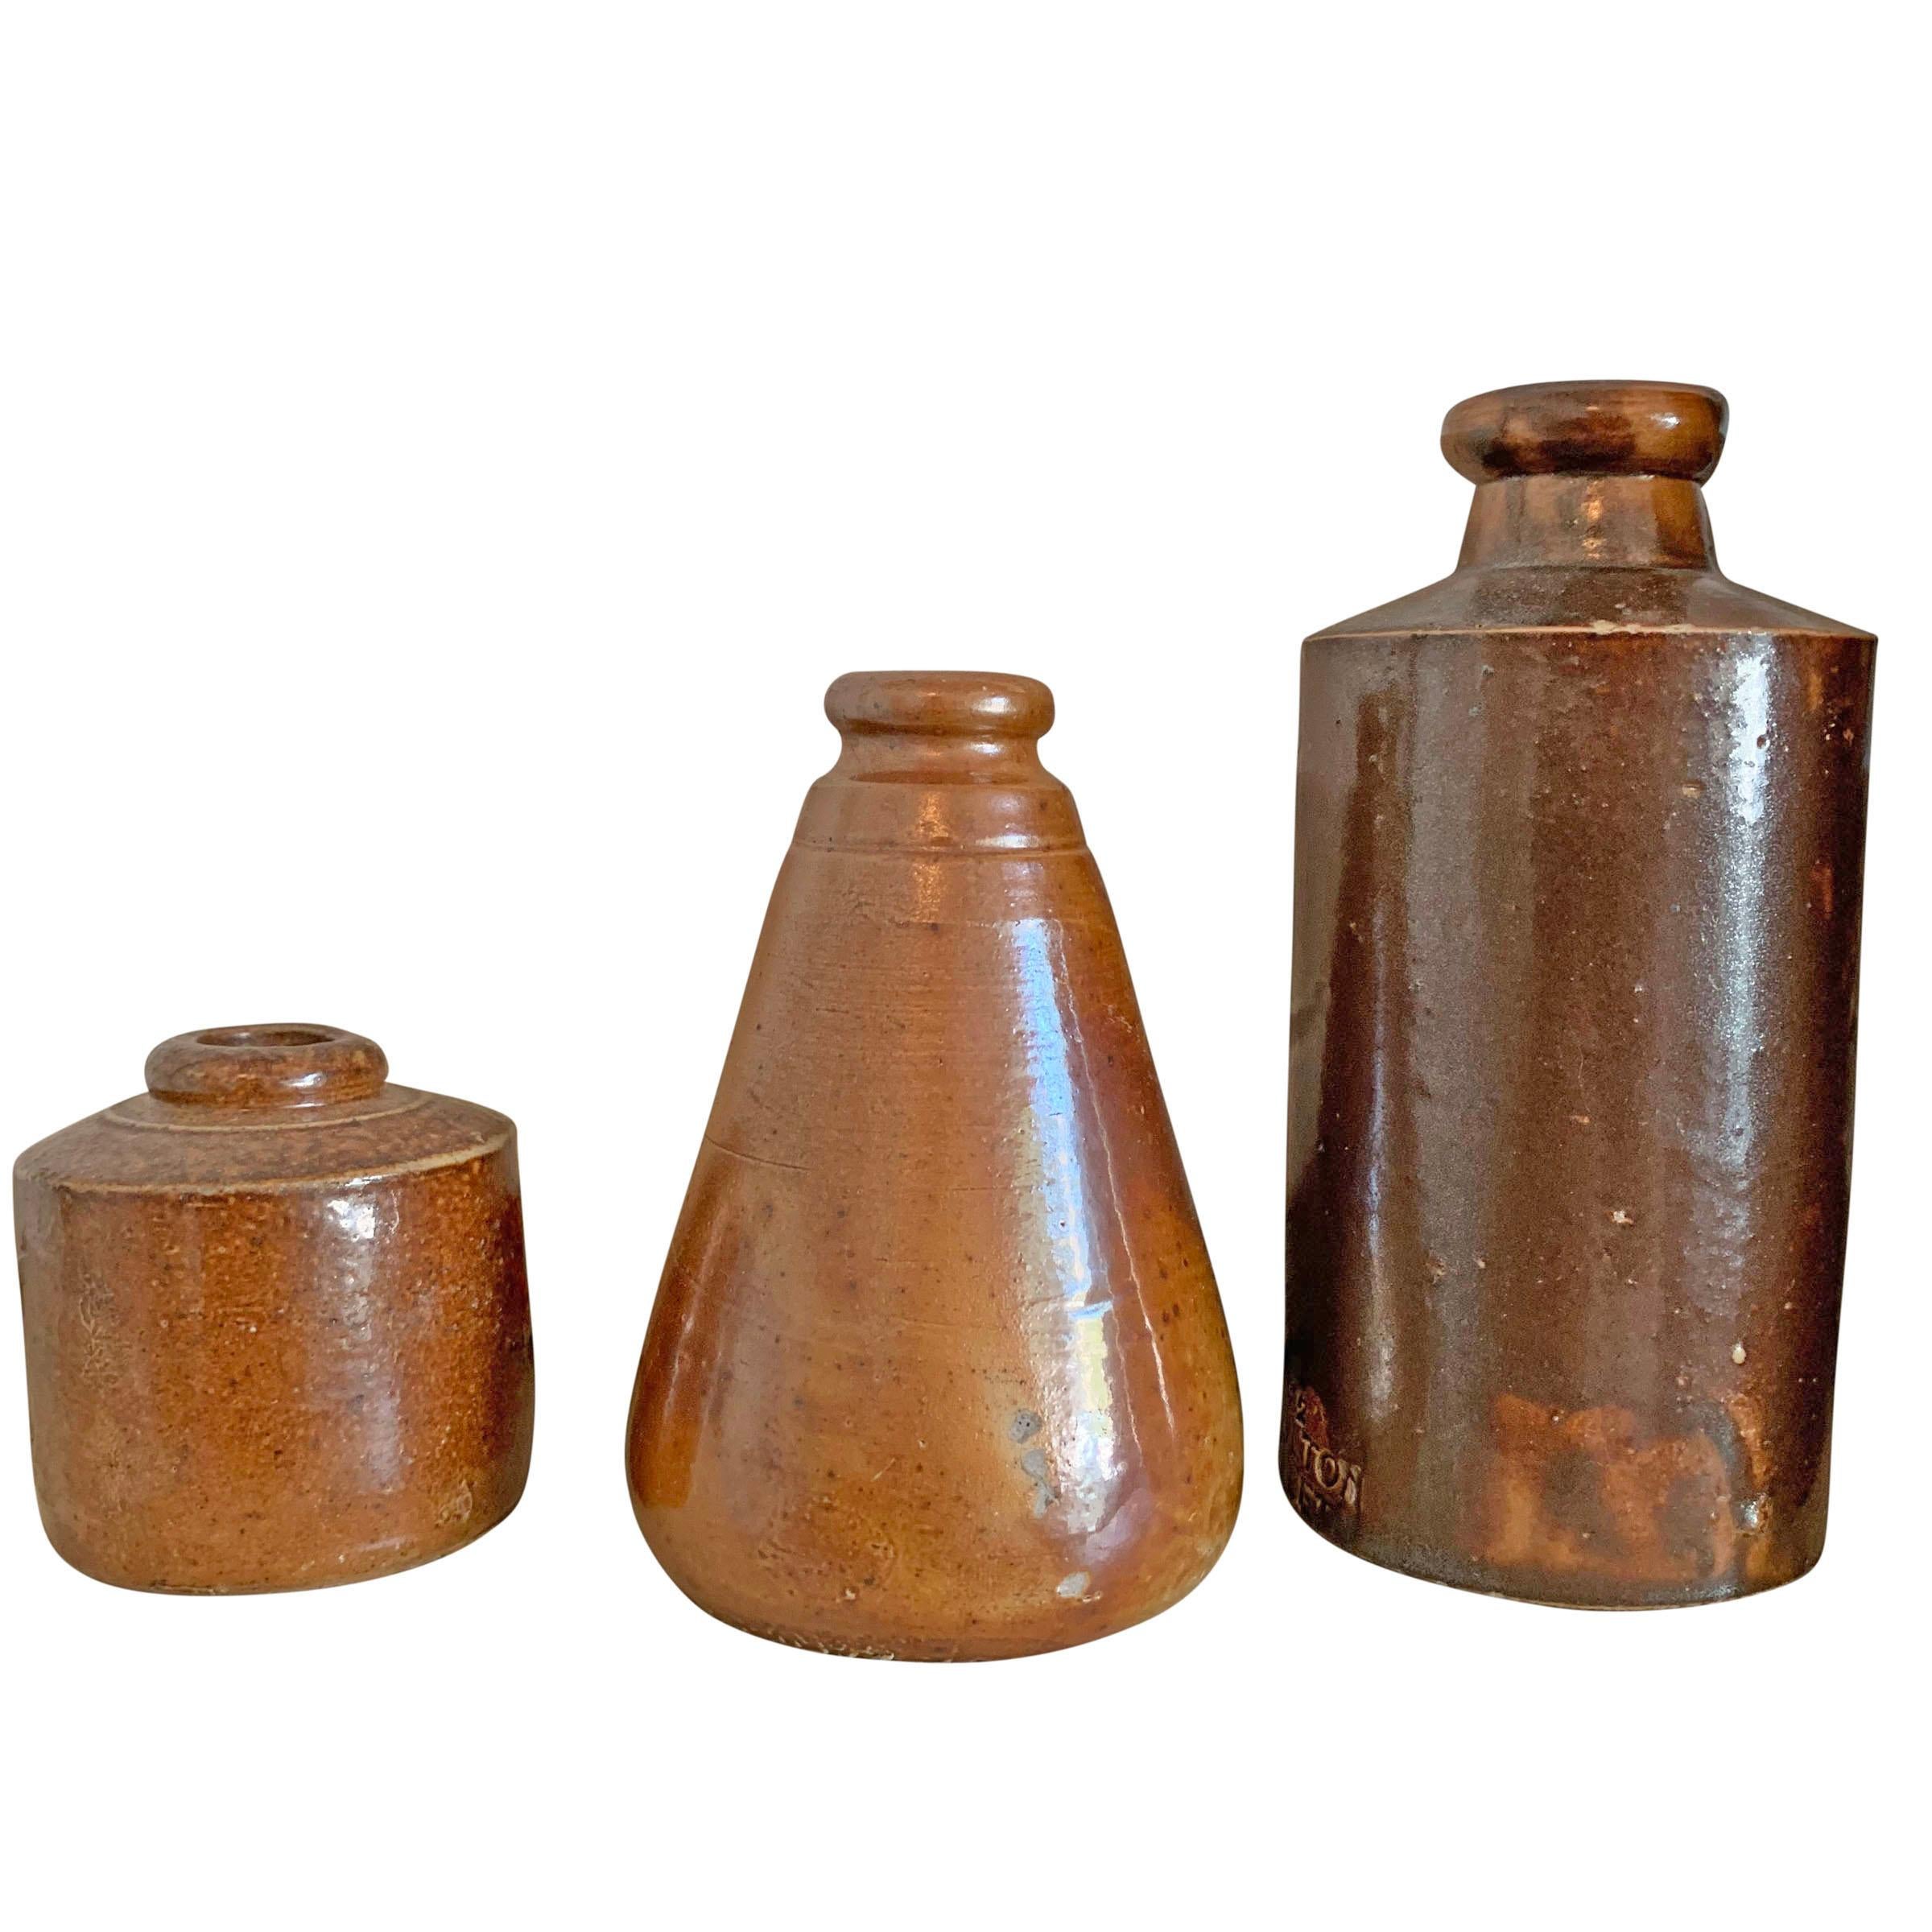 Rustic Collection of Eleven 19th Century English Ceramic Inkwells